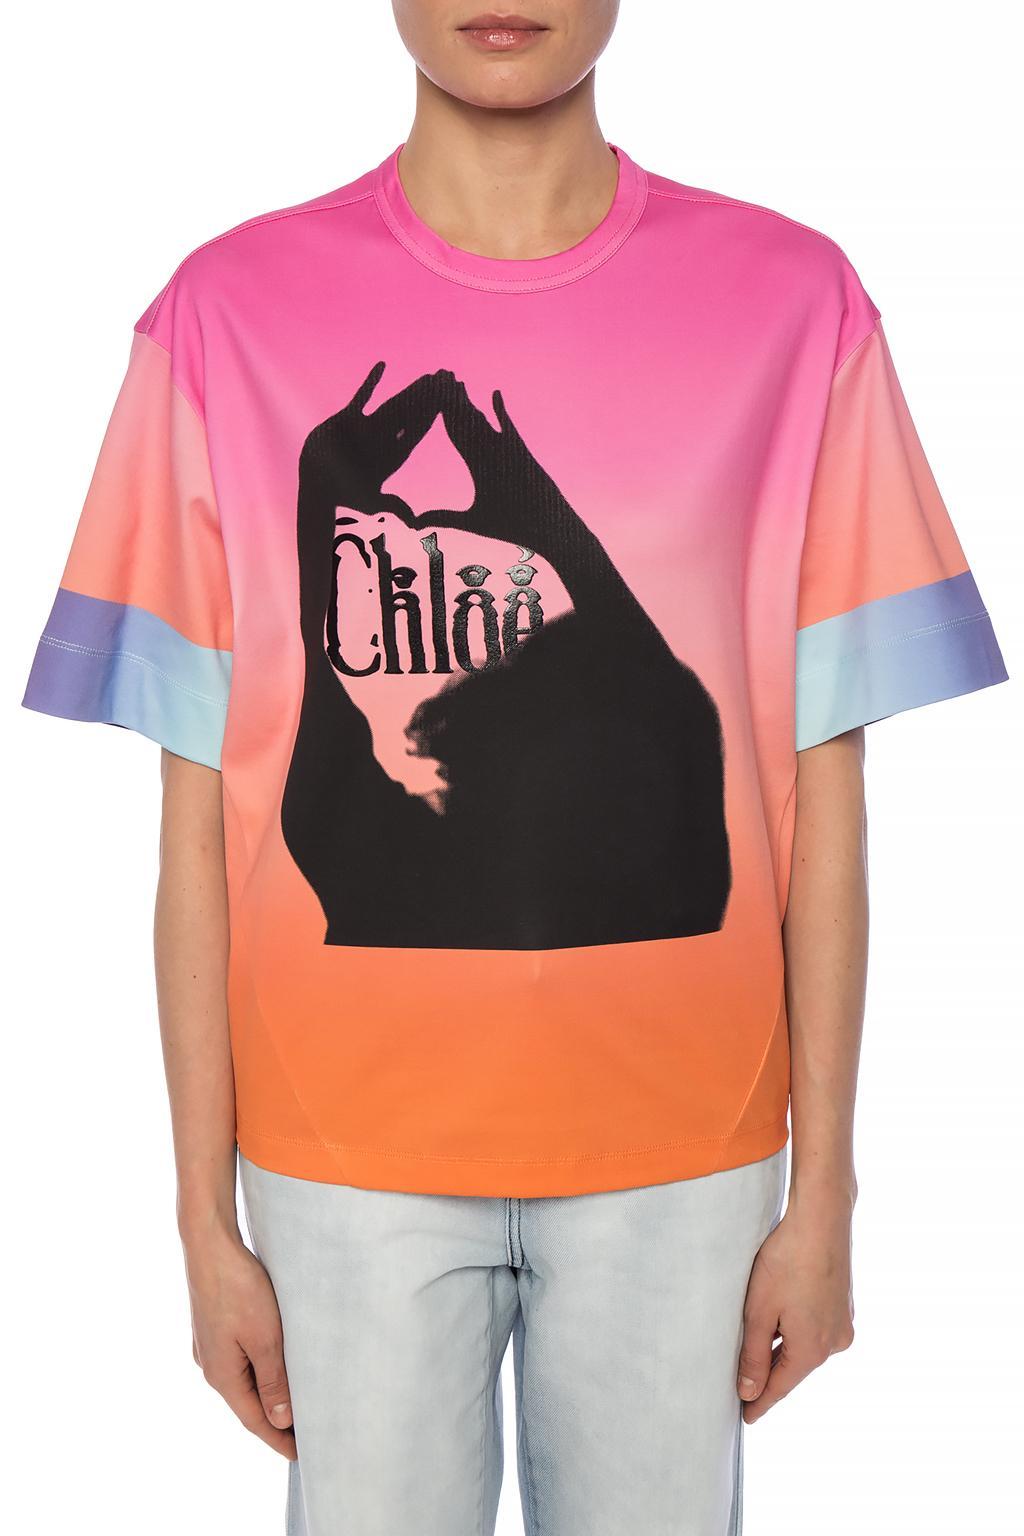 Chloé Ombre Logo Cotton T-shirt in Orange/Pink (Pink) | Lyst